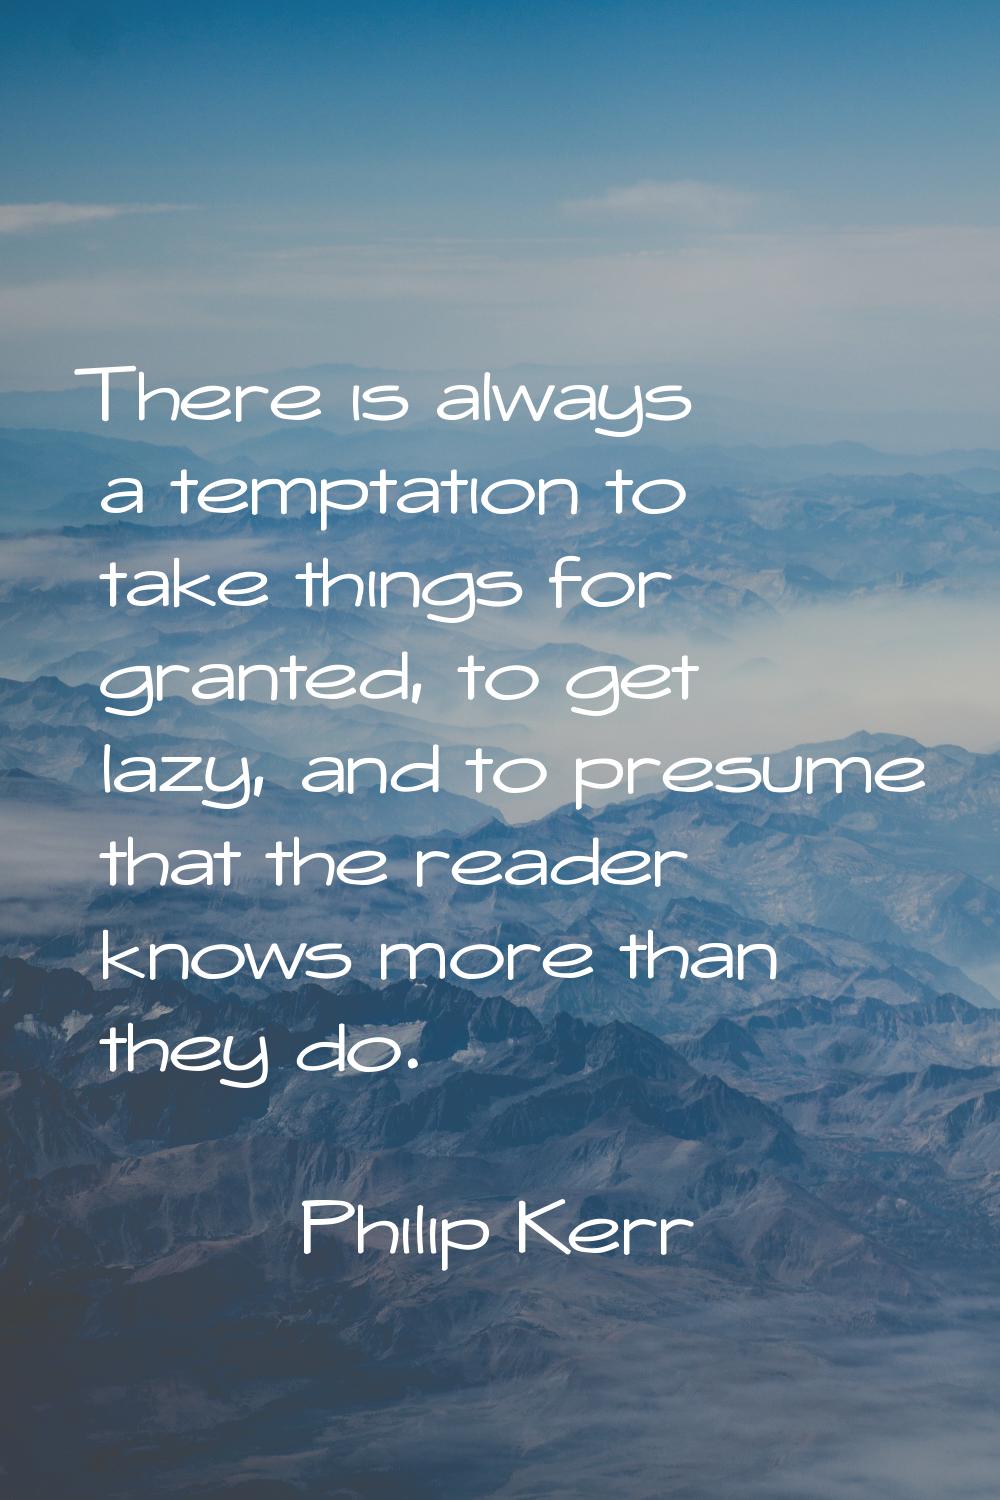 There is always a temptation to take things for granted, to get lazy, and to presume that the reade